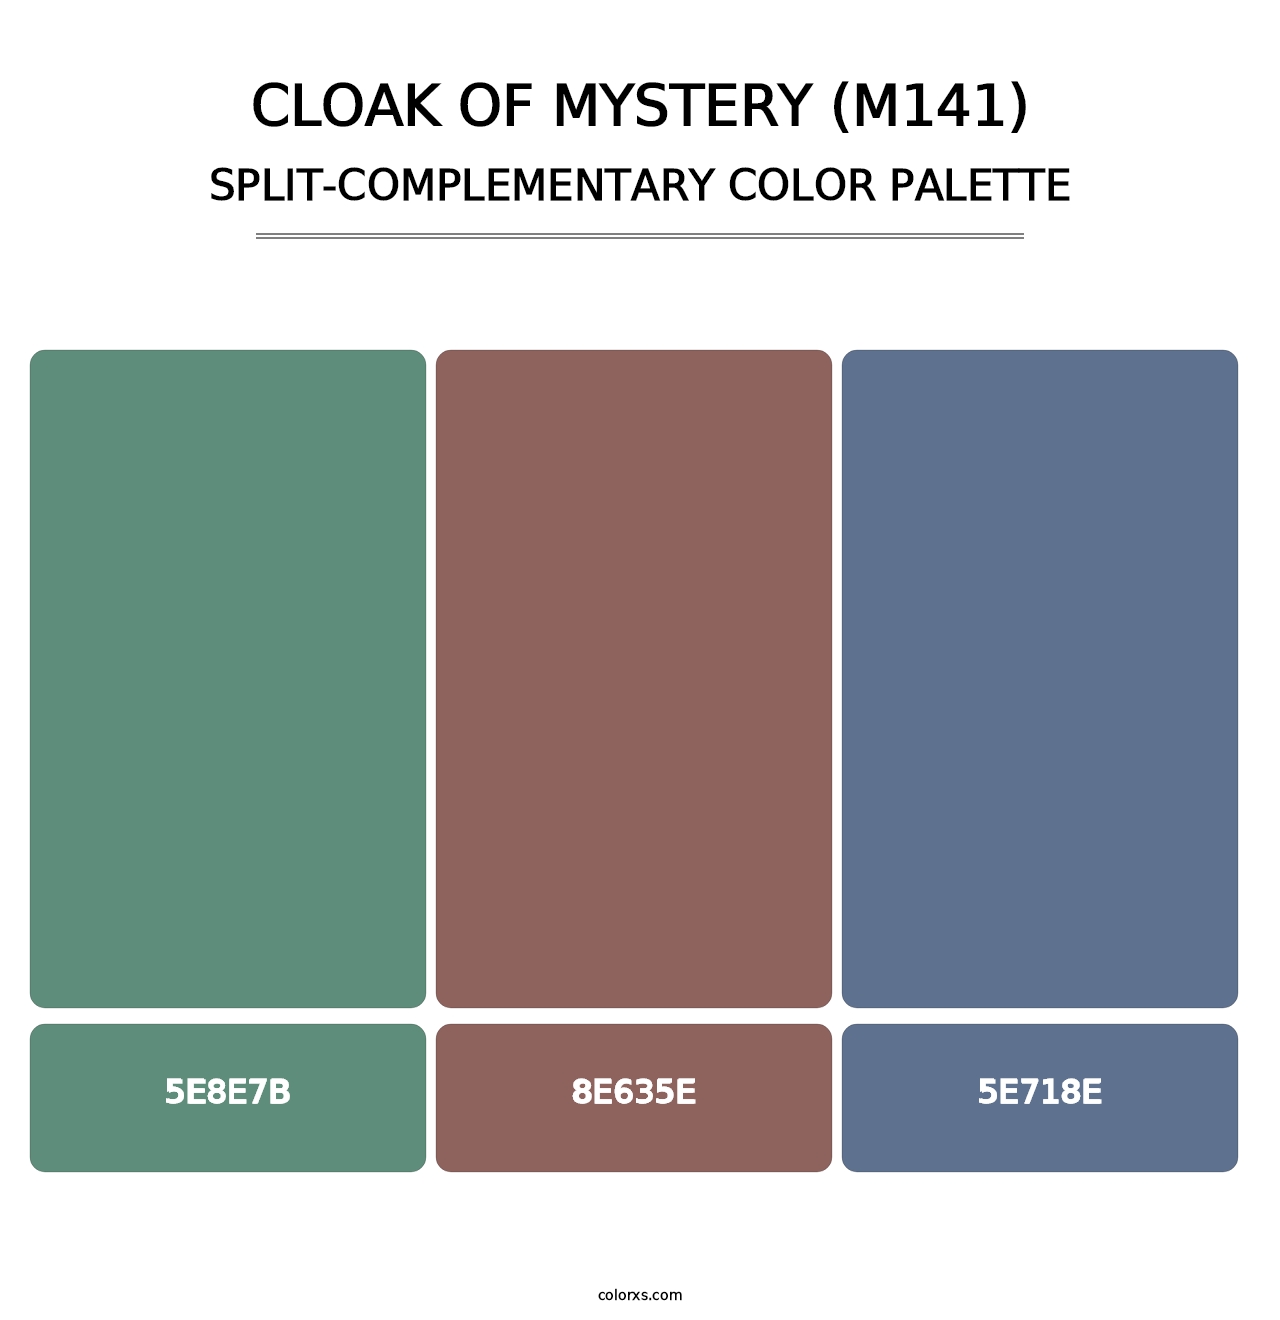 Cloak of Mystery (M141) - Split-Complementary Color Palette